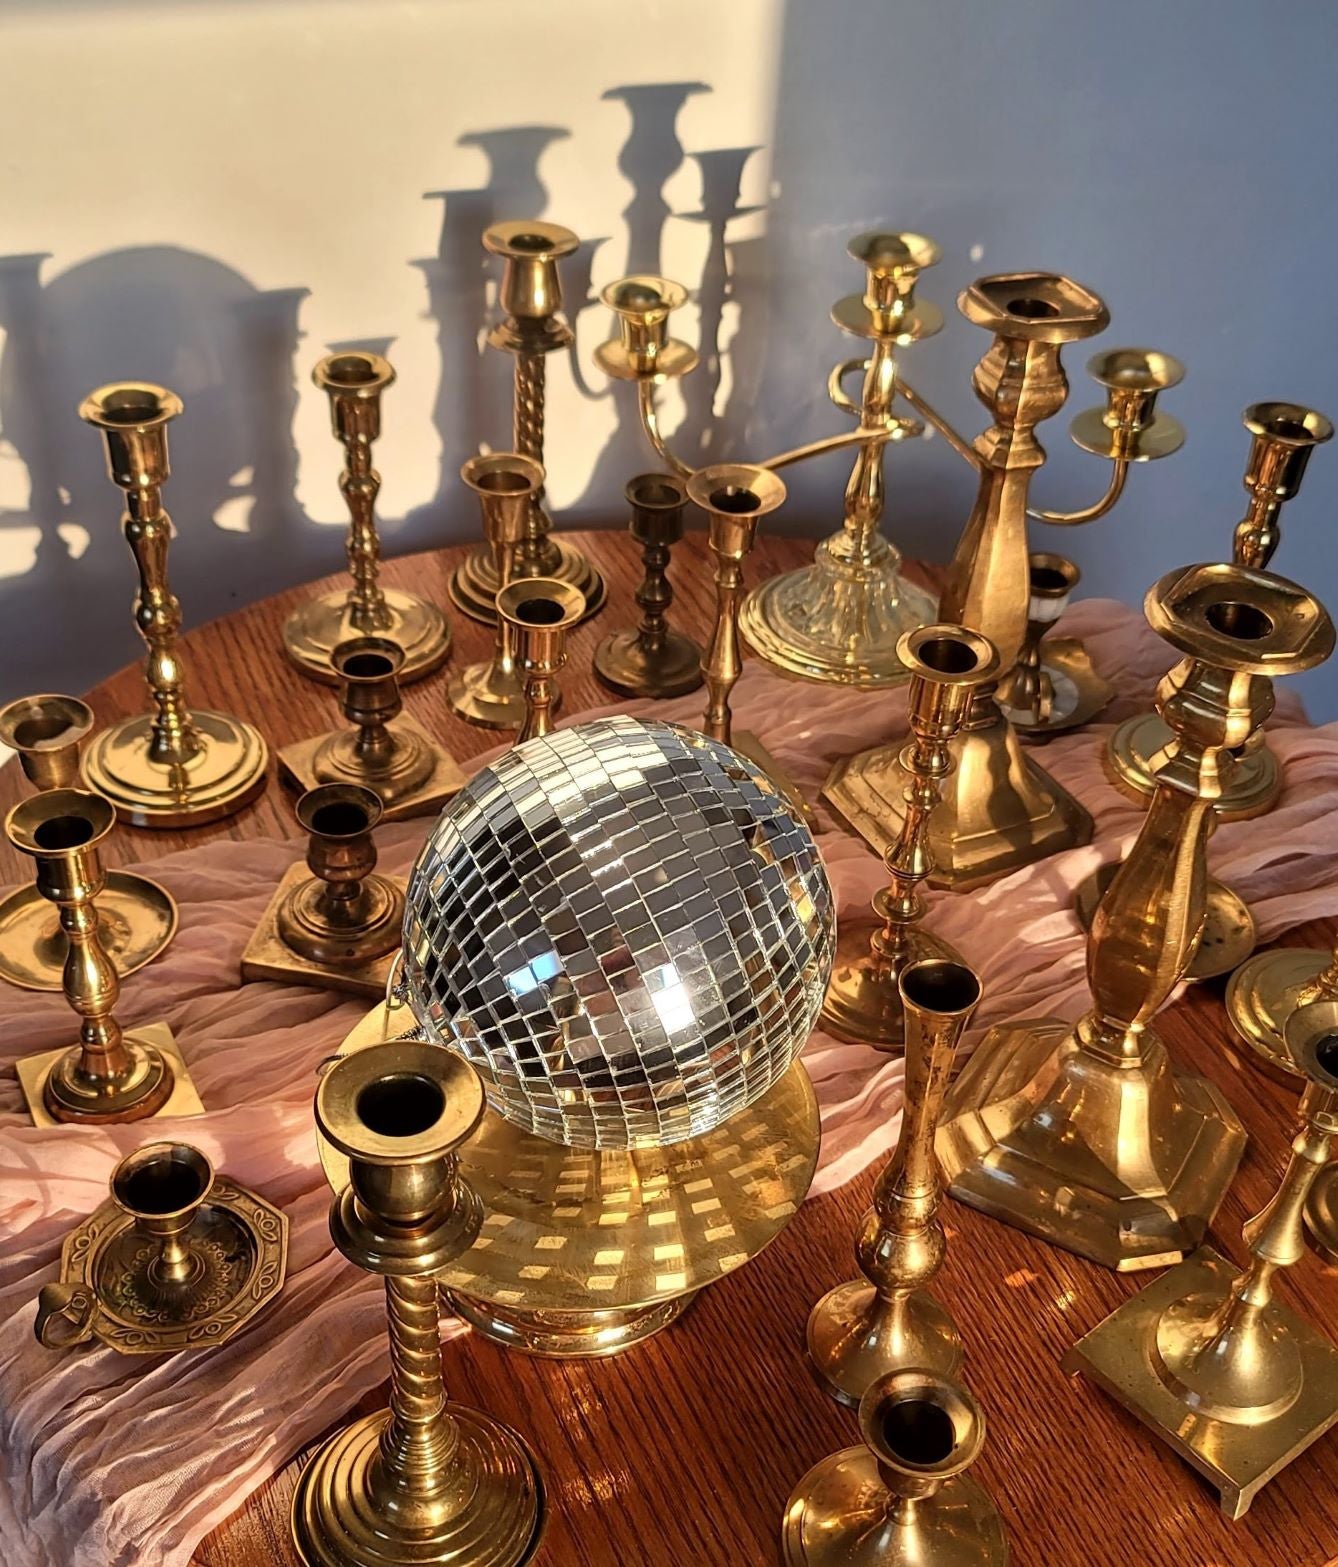 A collection of vintage brass candlesticks and candleabras for taper candles. Beautiful gold canlde holders, brass candle holders, candle sticks for rent in Winnipeg and surrounding areas.